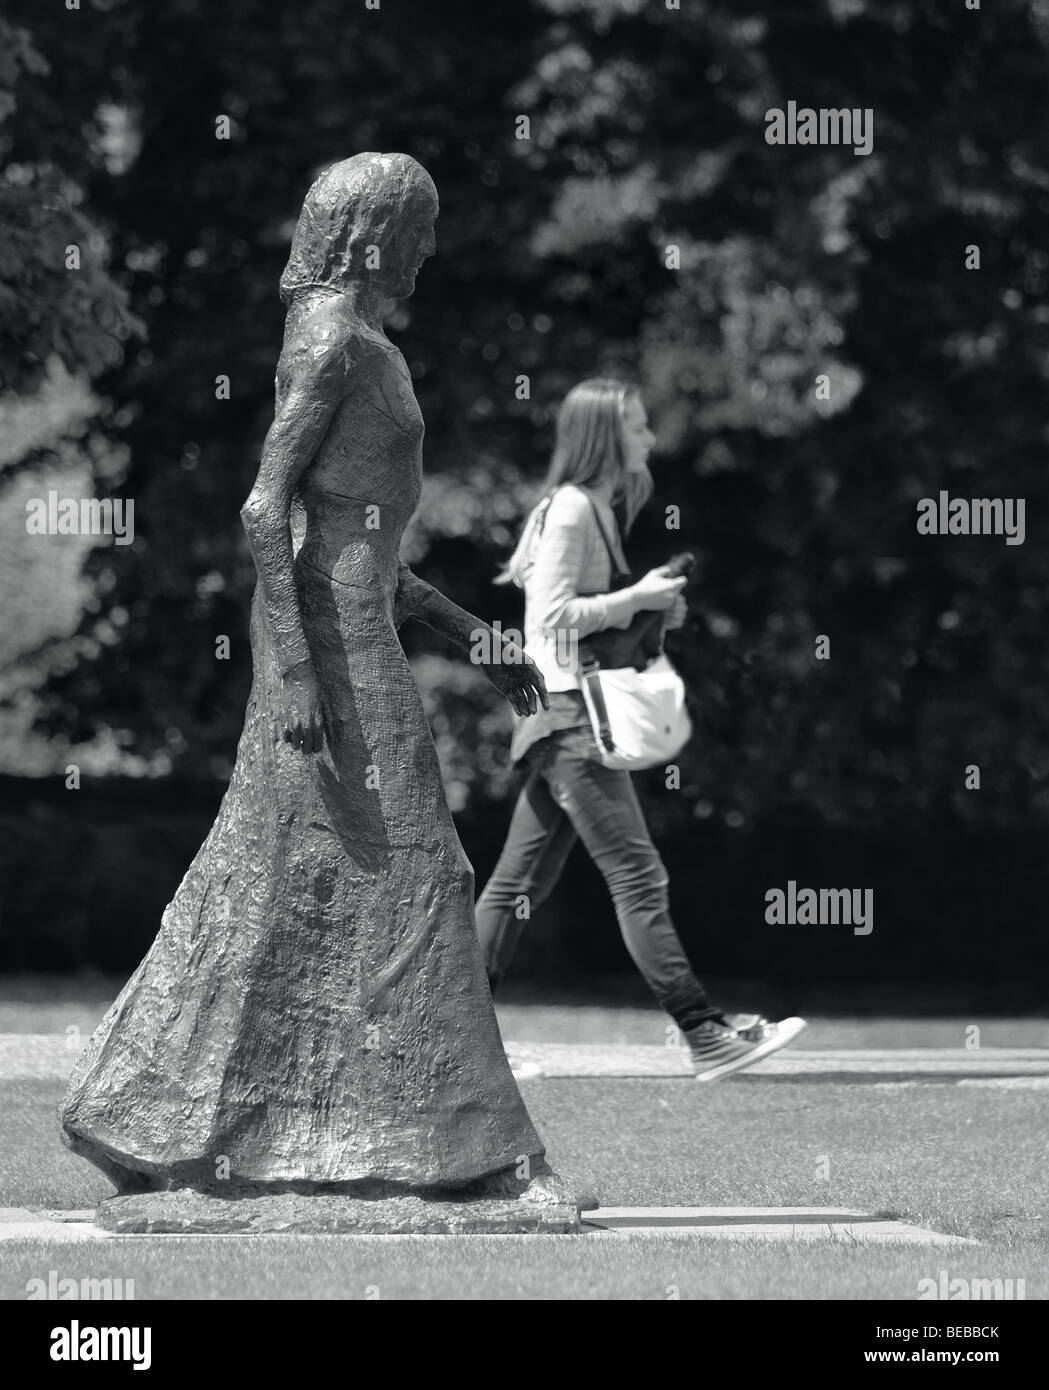 A girl walking past a sculpture by Elizabeth Frink echoes the pose of the sculpture. Stock Photo